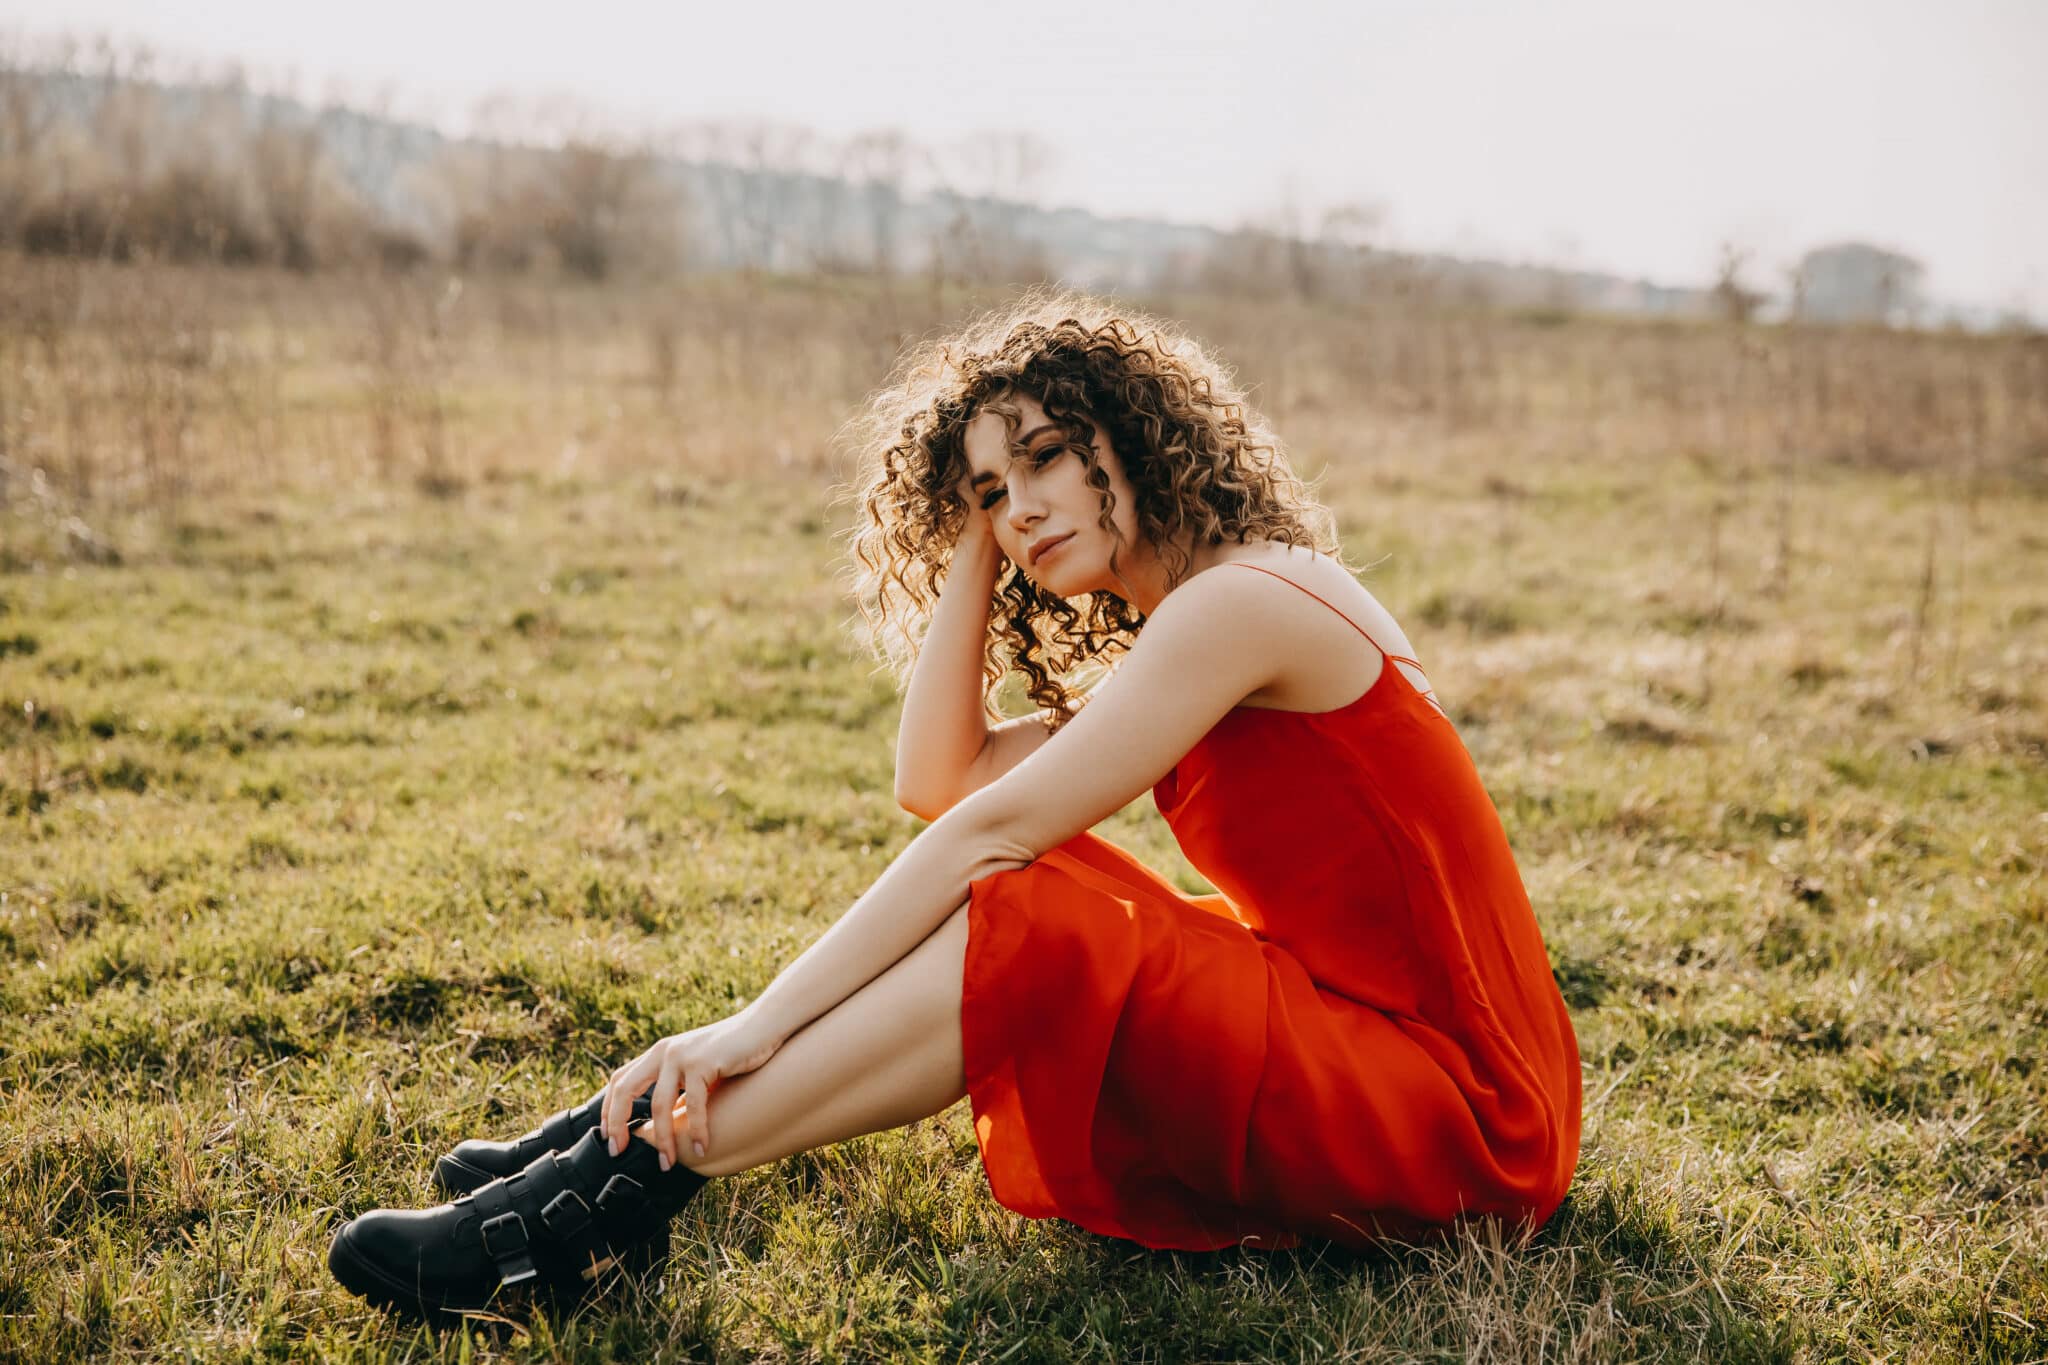 Young calm woman with curly hair, wearing a red summer dress outdoors, sitting in a field.